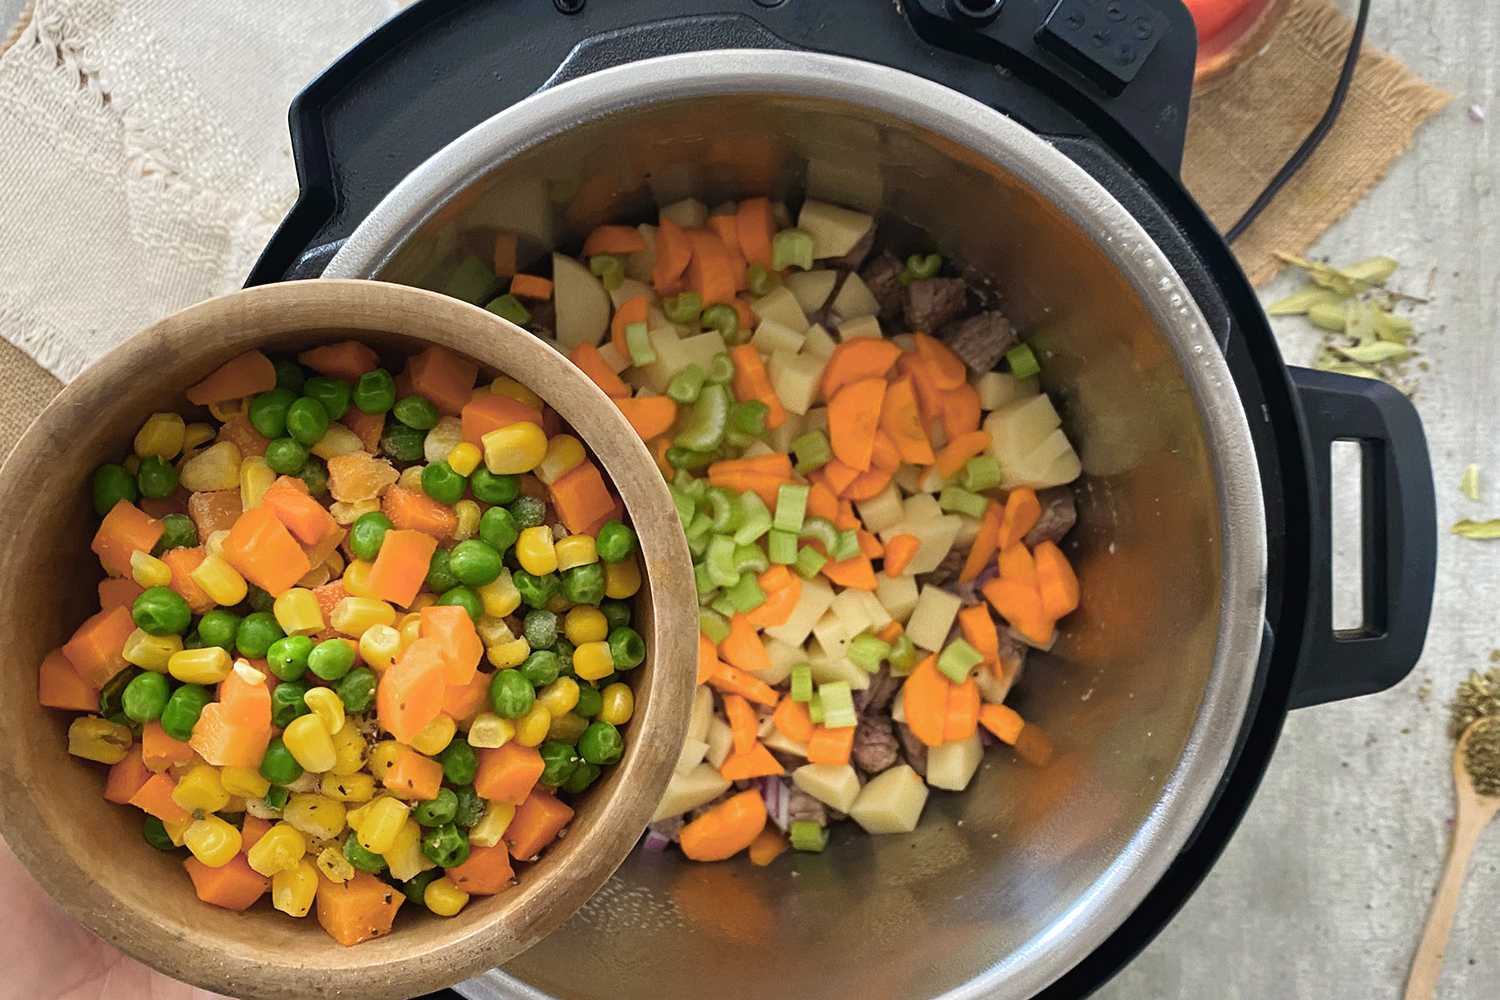 Adding vegetables to the Instant Pot